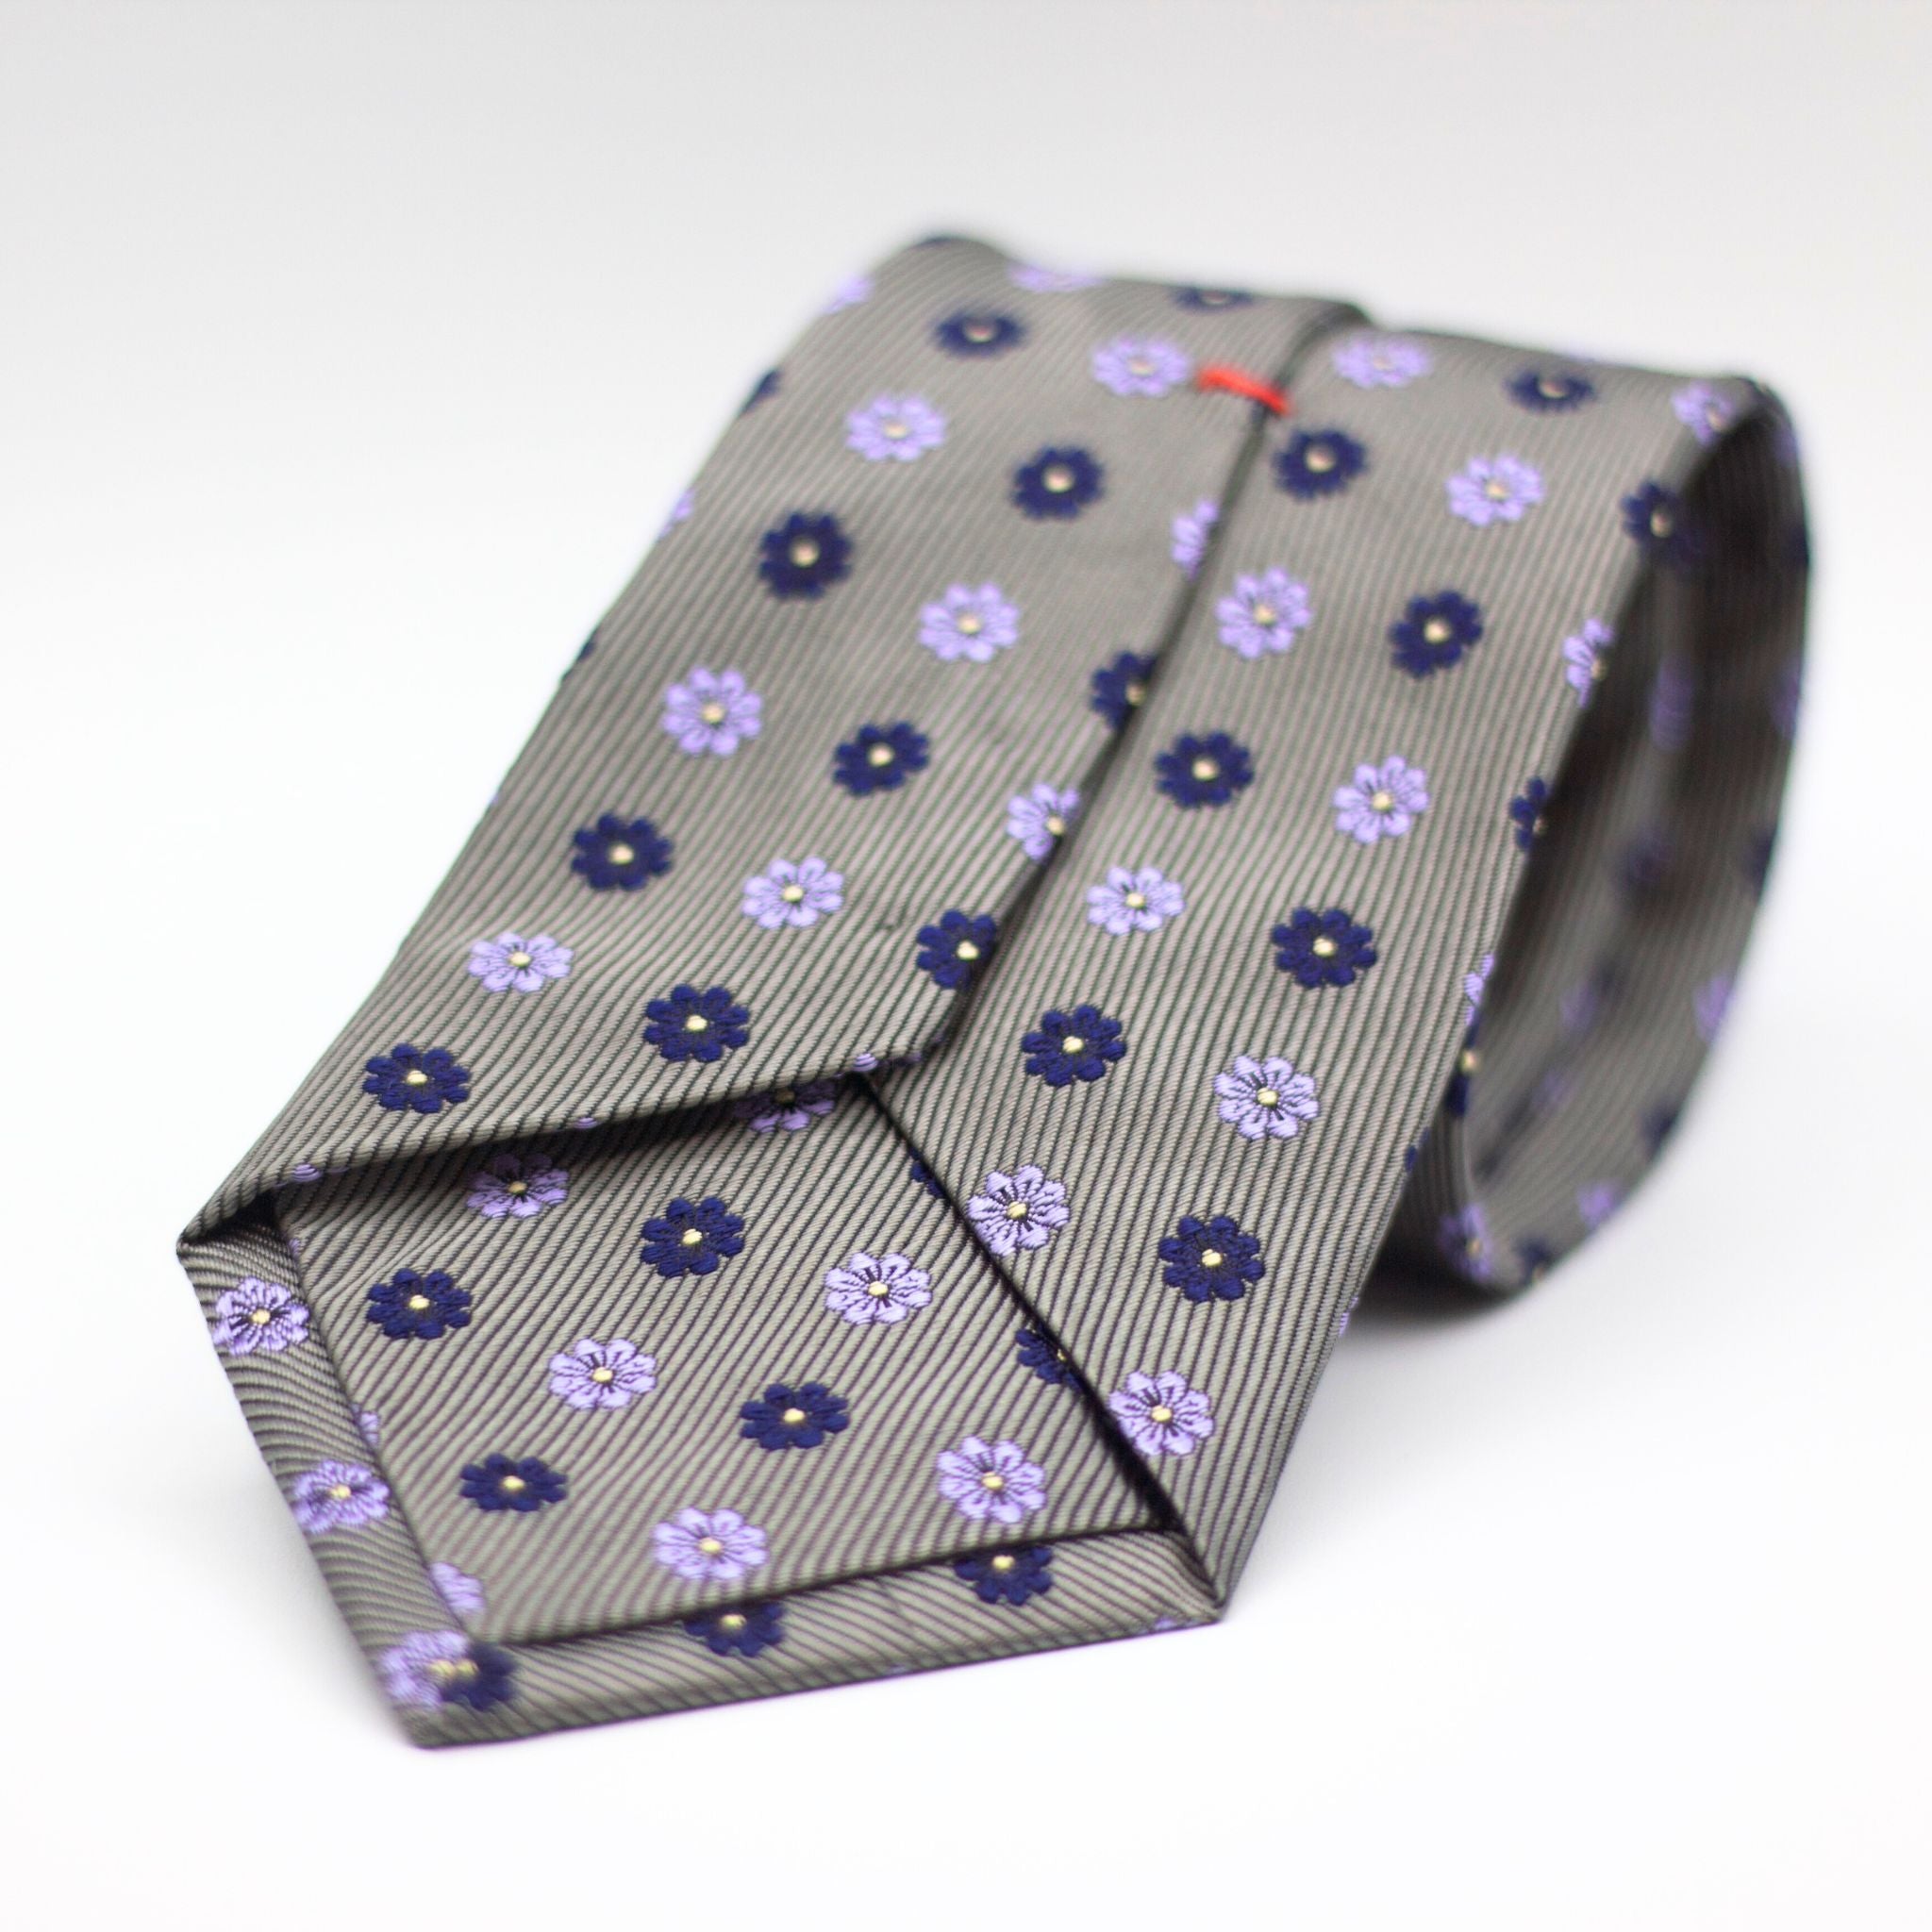 Cruciani & Bella 100% Silk Made in England Jacquard  Tipped Grey, Blue Navy and Lilac Floral Motif Tie Handmade in Italy 8 cm x 150 cm